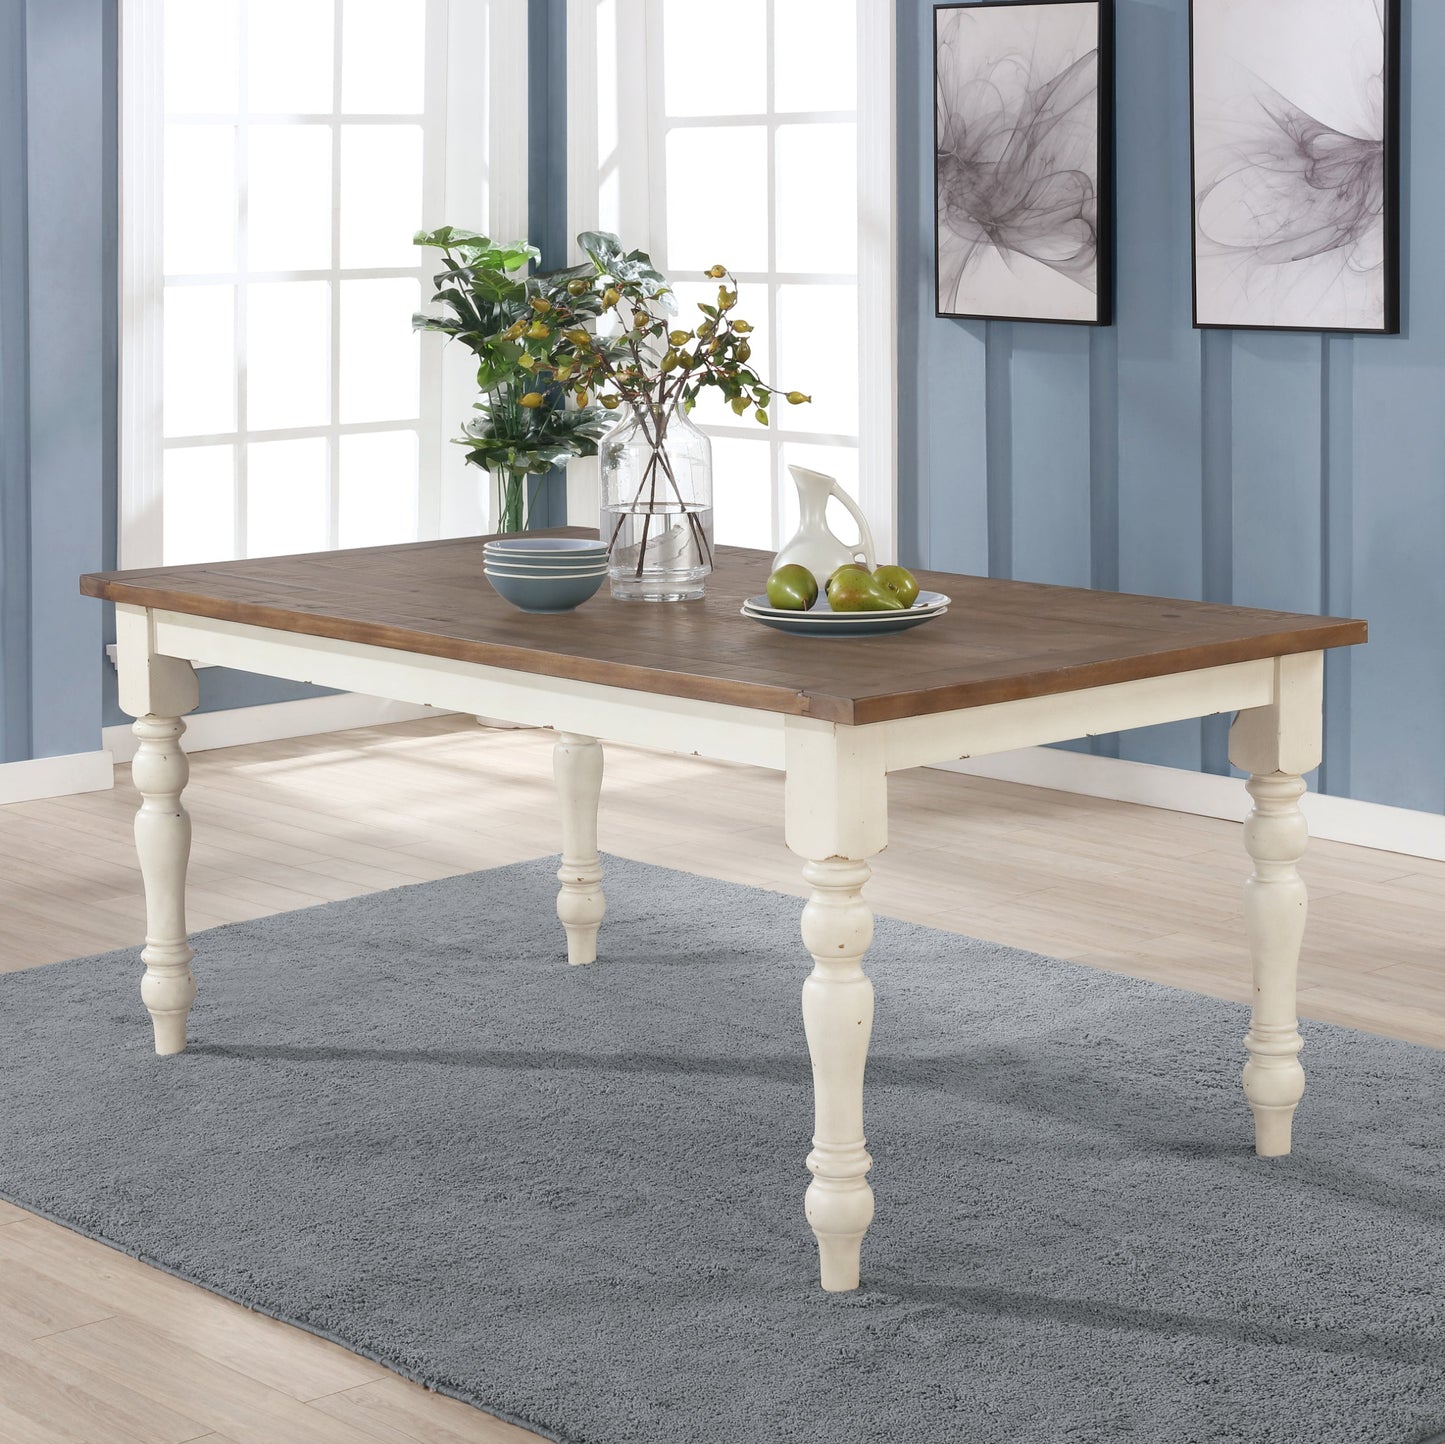 Prato 5-piece Dining Table Set With Cross Back Chairs, Antique White and Distressed Oak